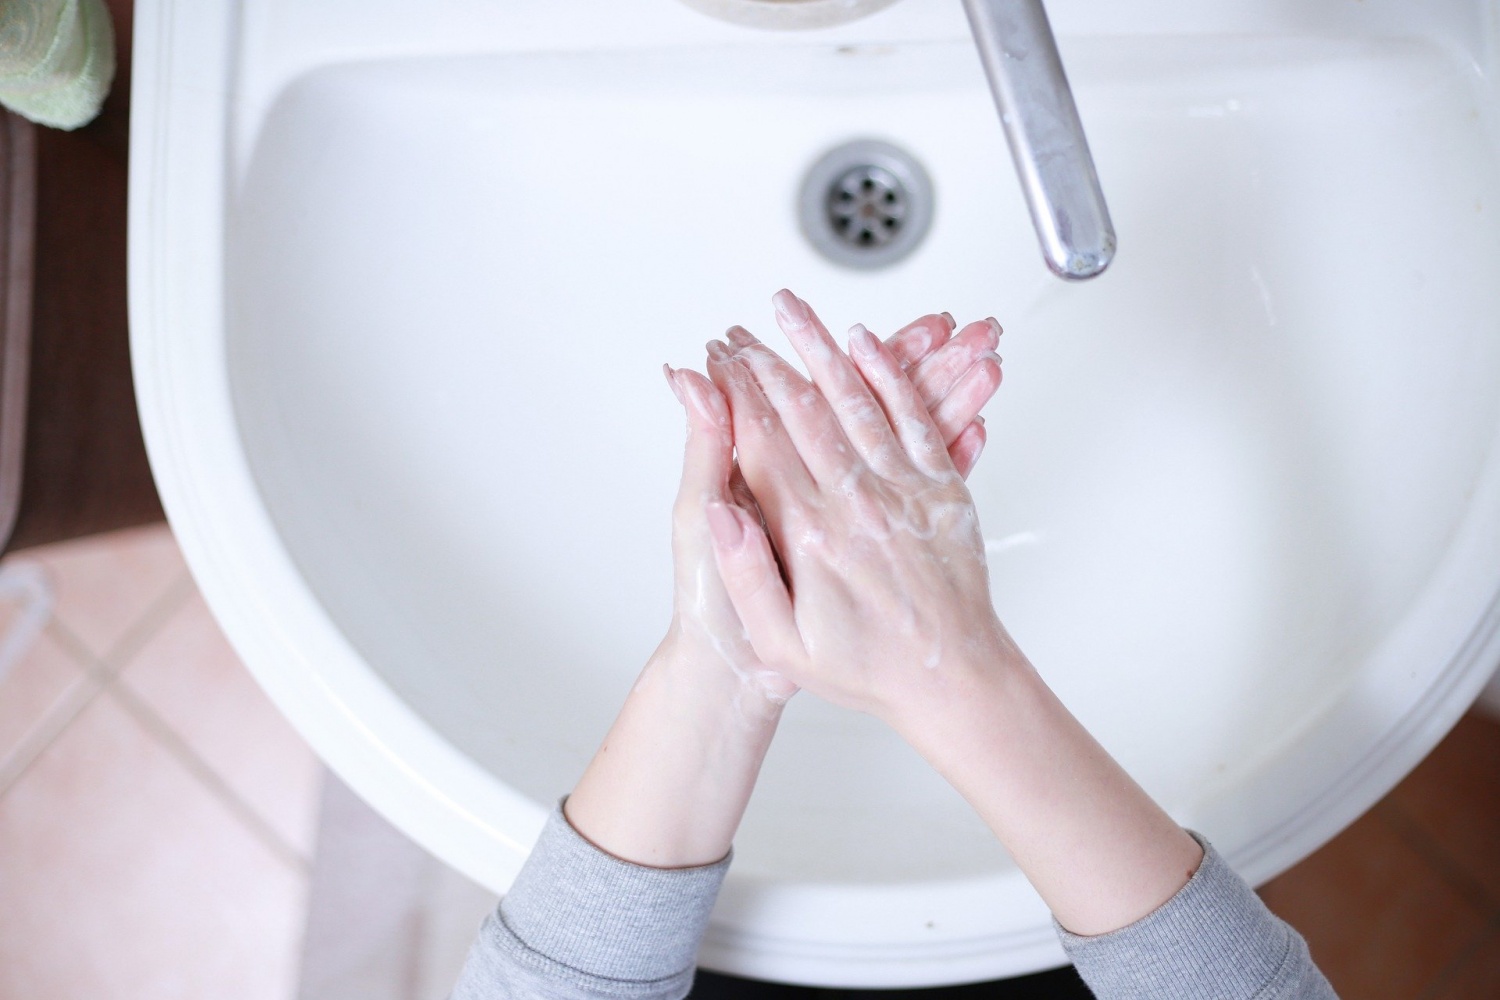 Here's How to Properly Clean Your Hands, Home, and Phone to Prevent Coronavirus Infection